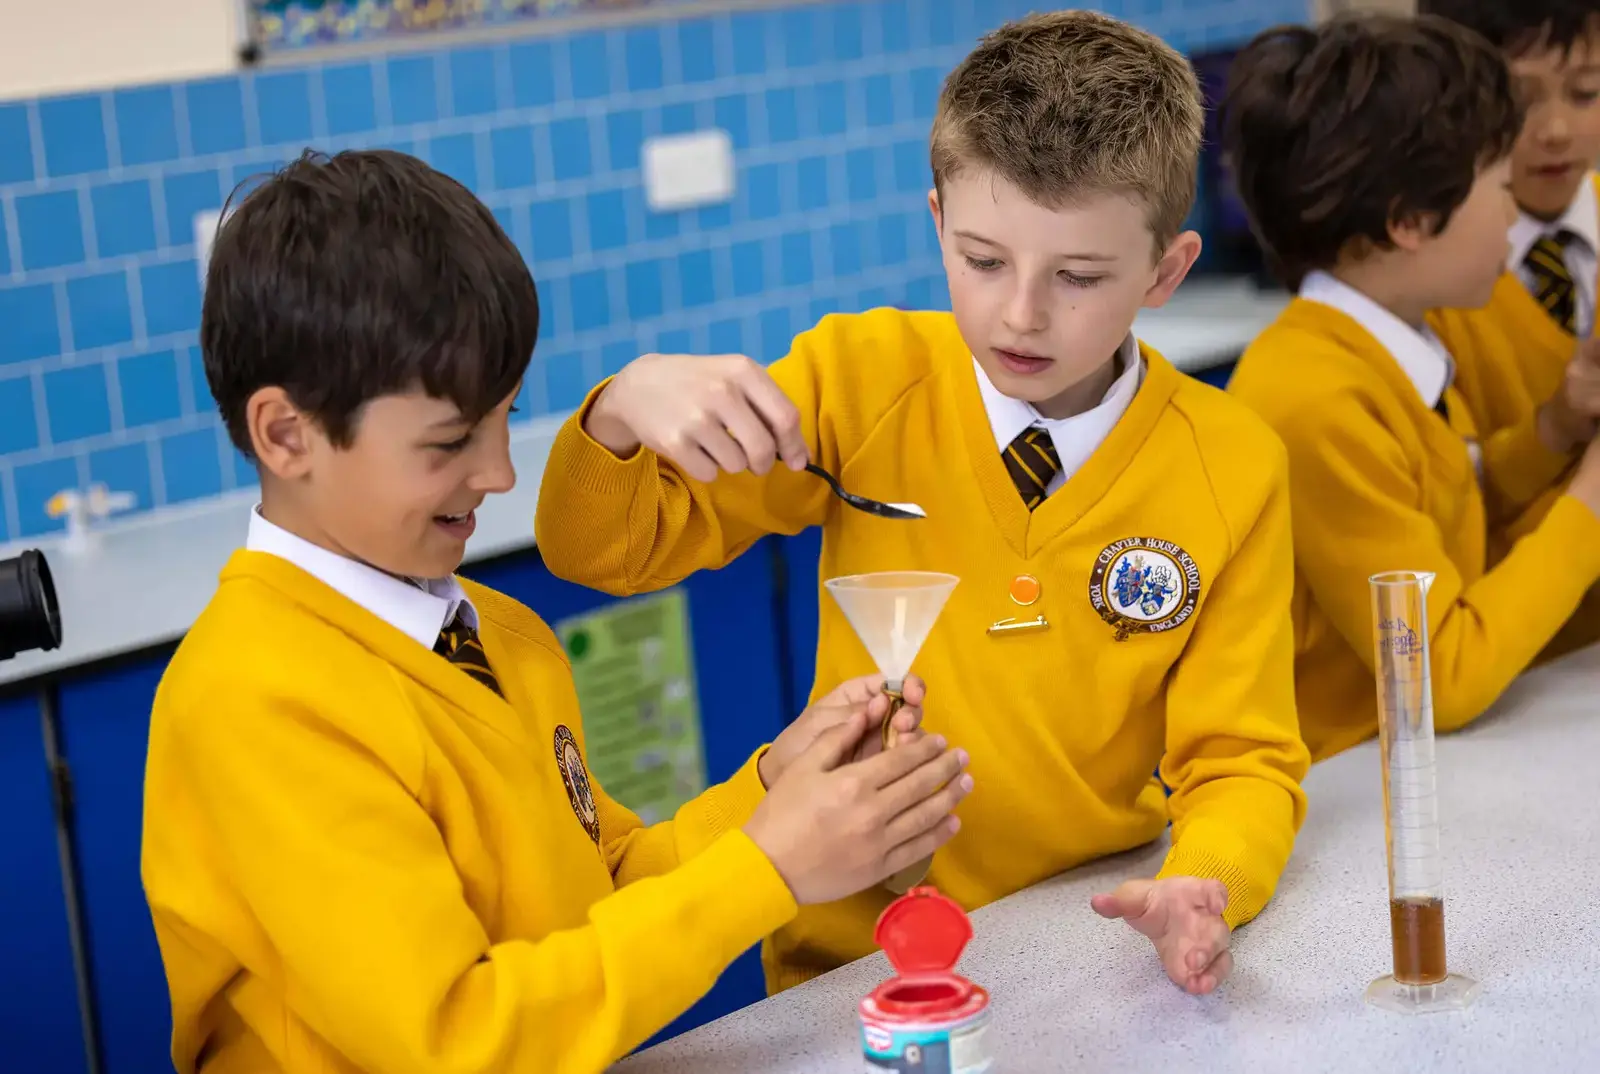 Chapter House School pupils conducting a science experiment